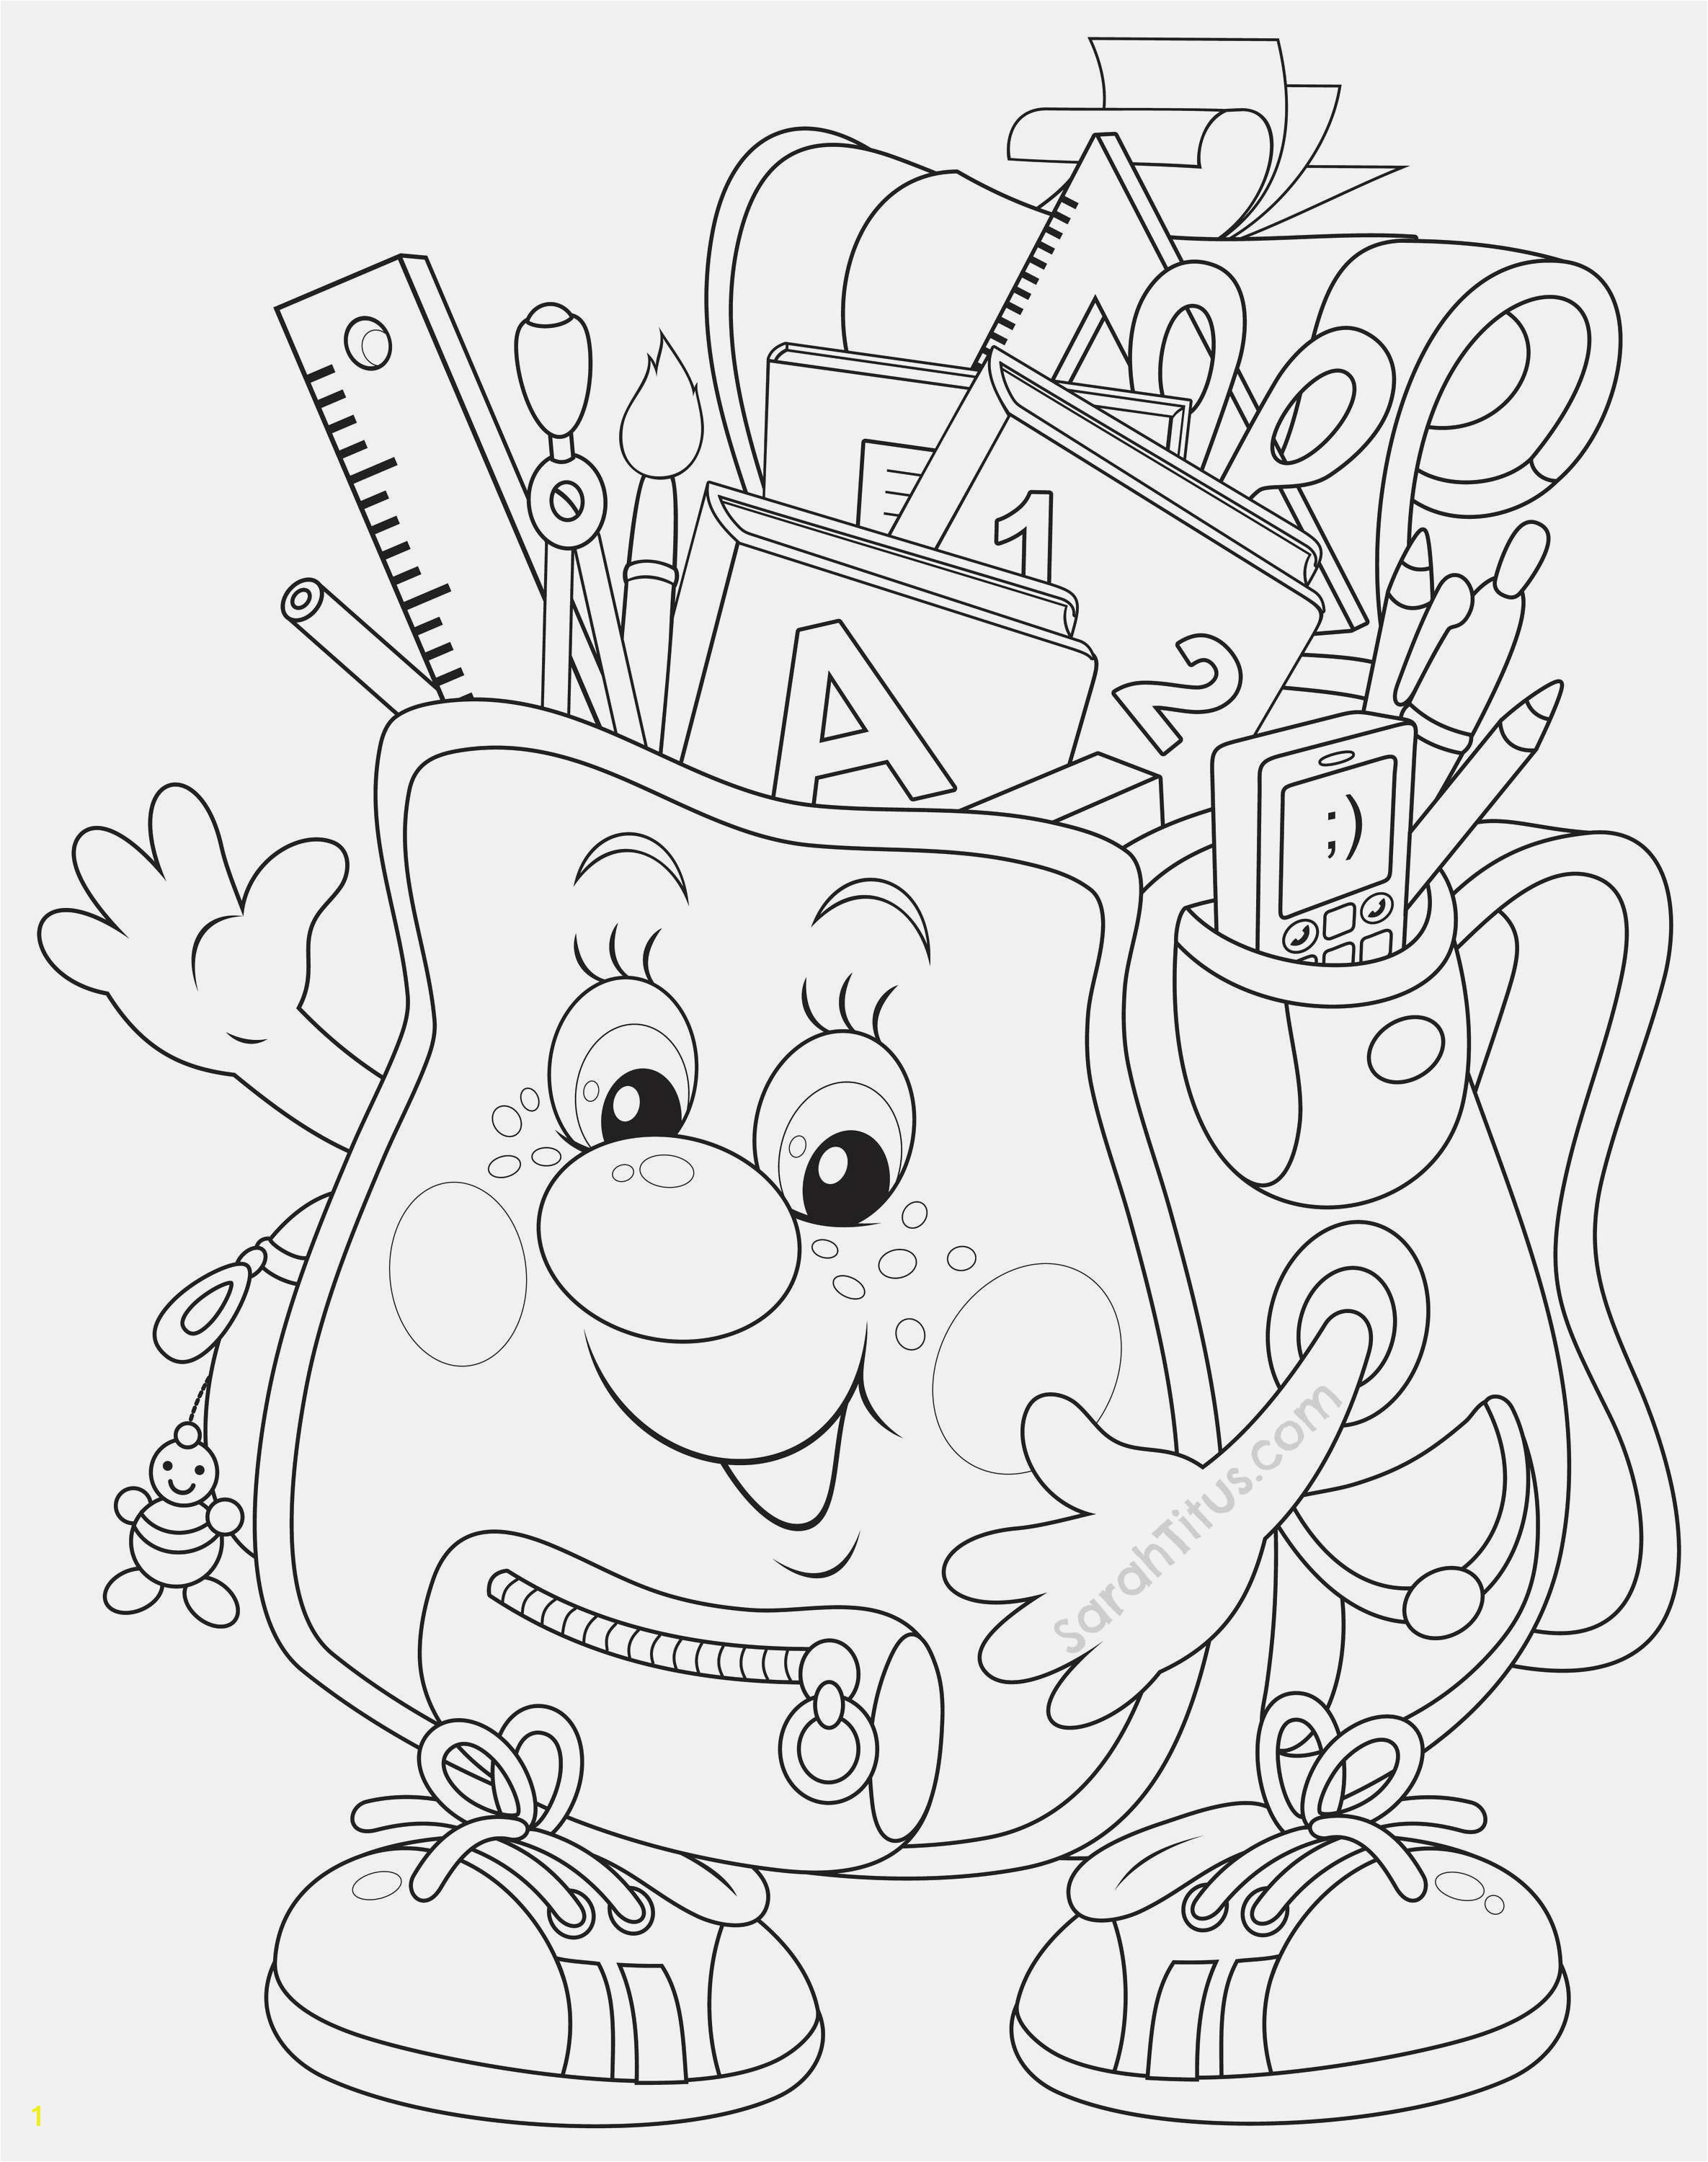 First Week Of School Coloring Pages Hello Kitty Printable Coloring Pages Coloring & Activity Hello Kitty